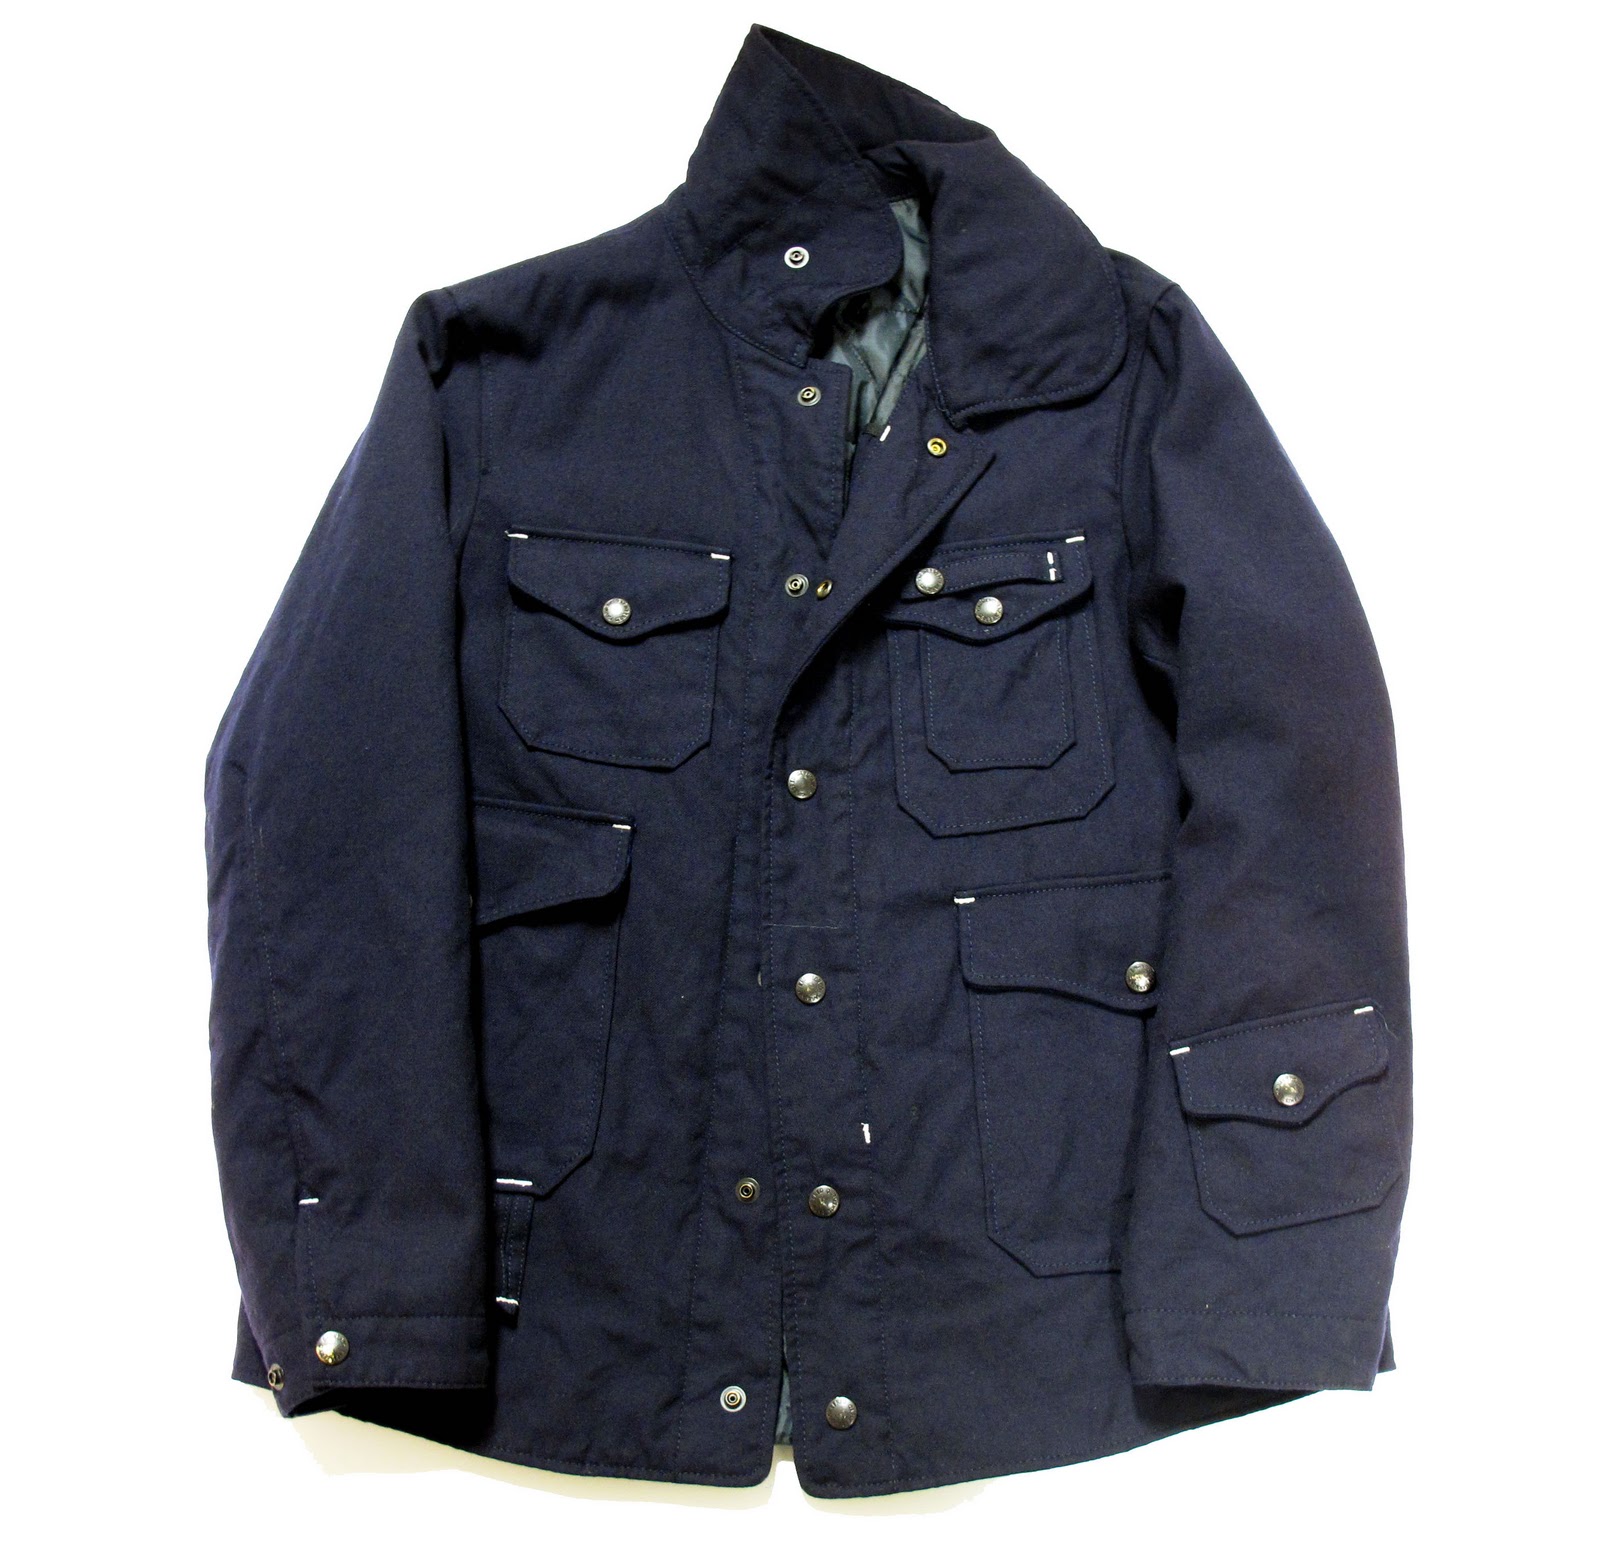 Nepenthes New York: 「IN STOCK」FWK by Engineered Garments FW11